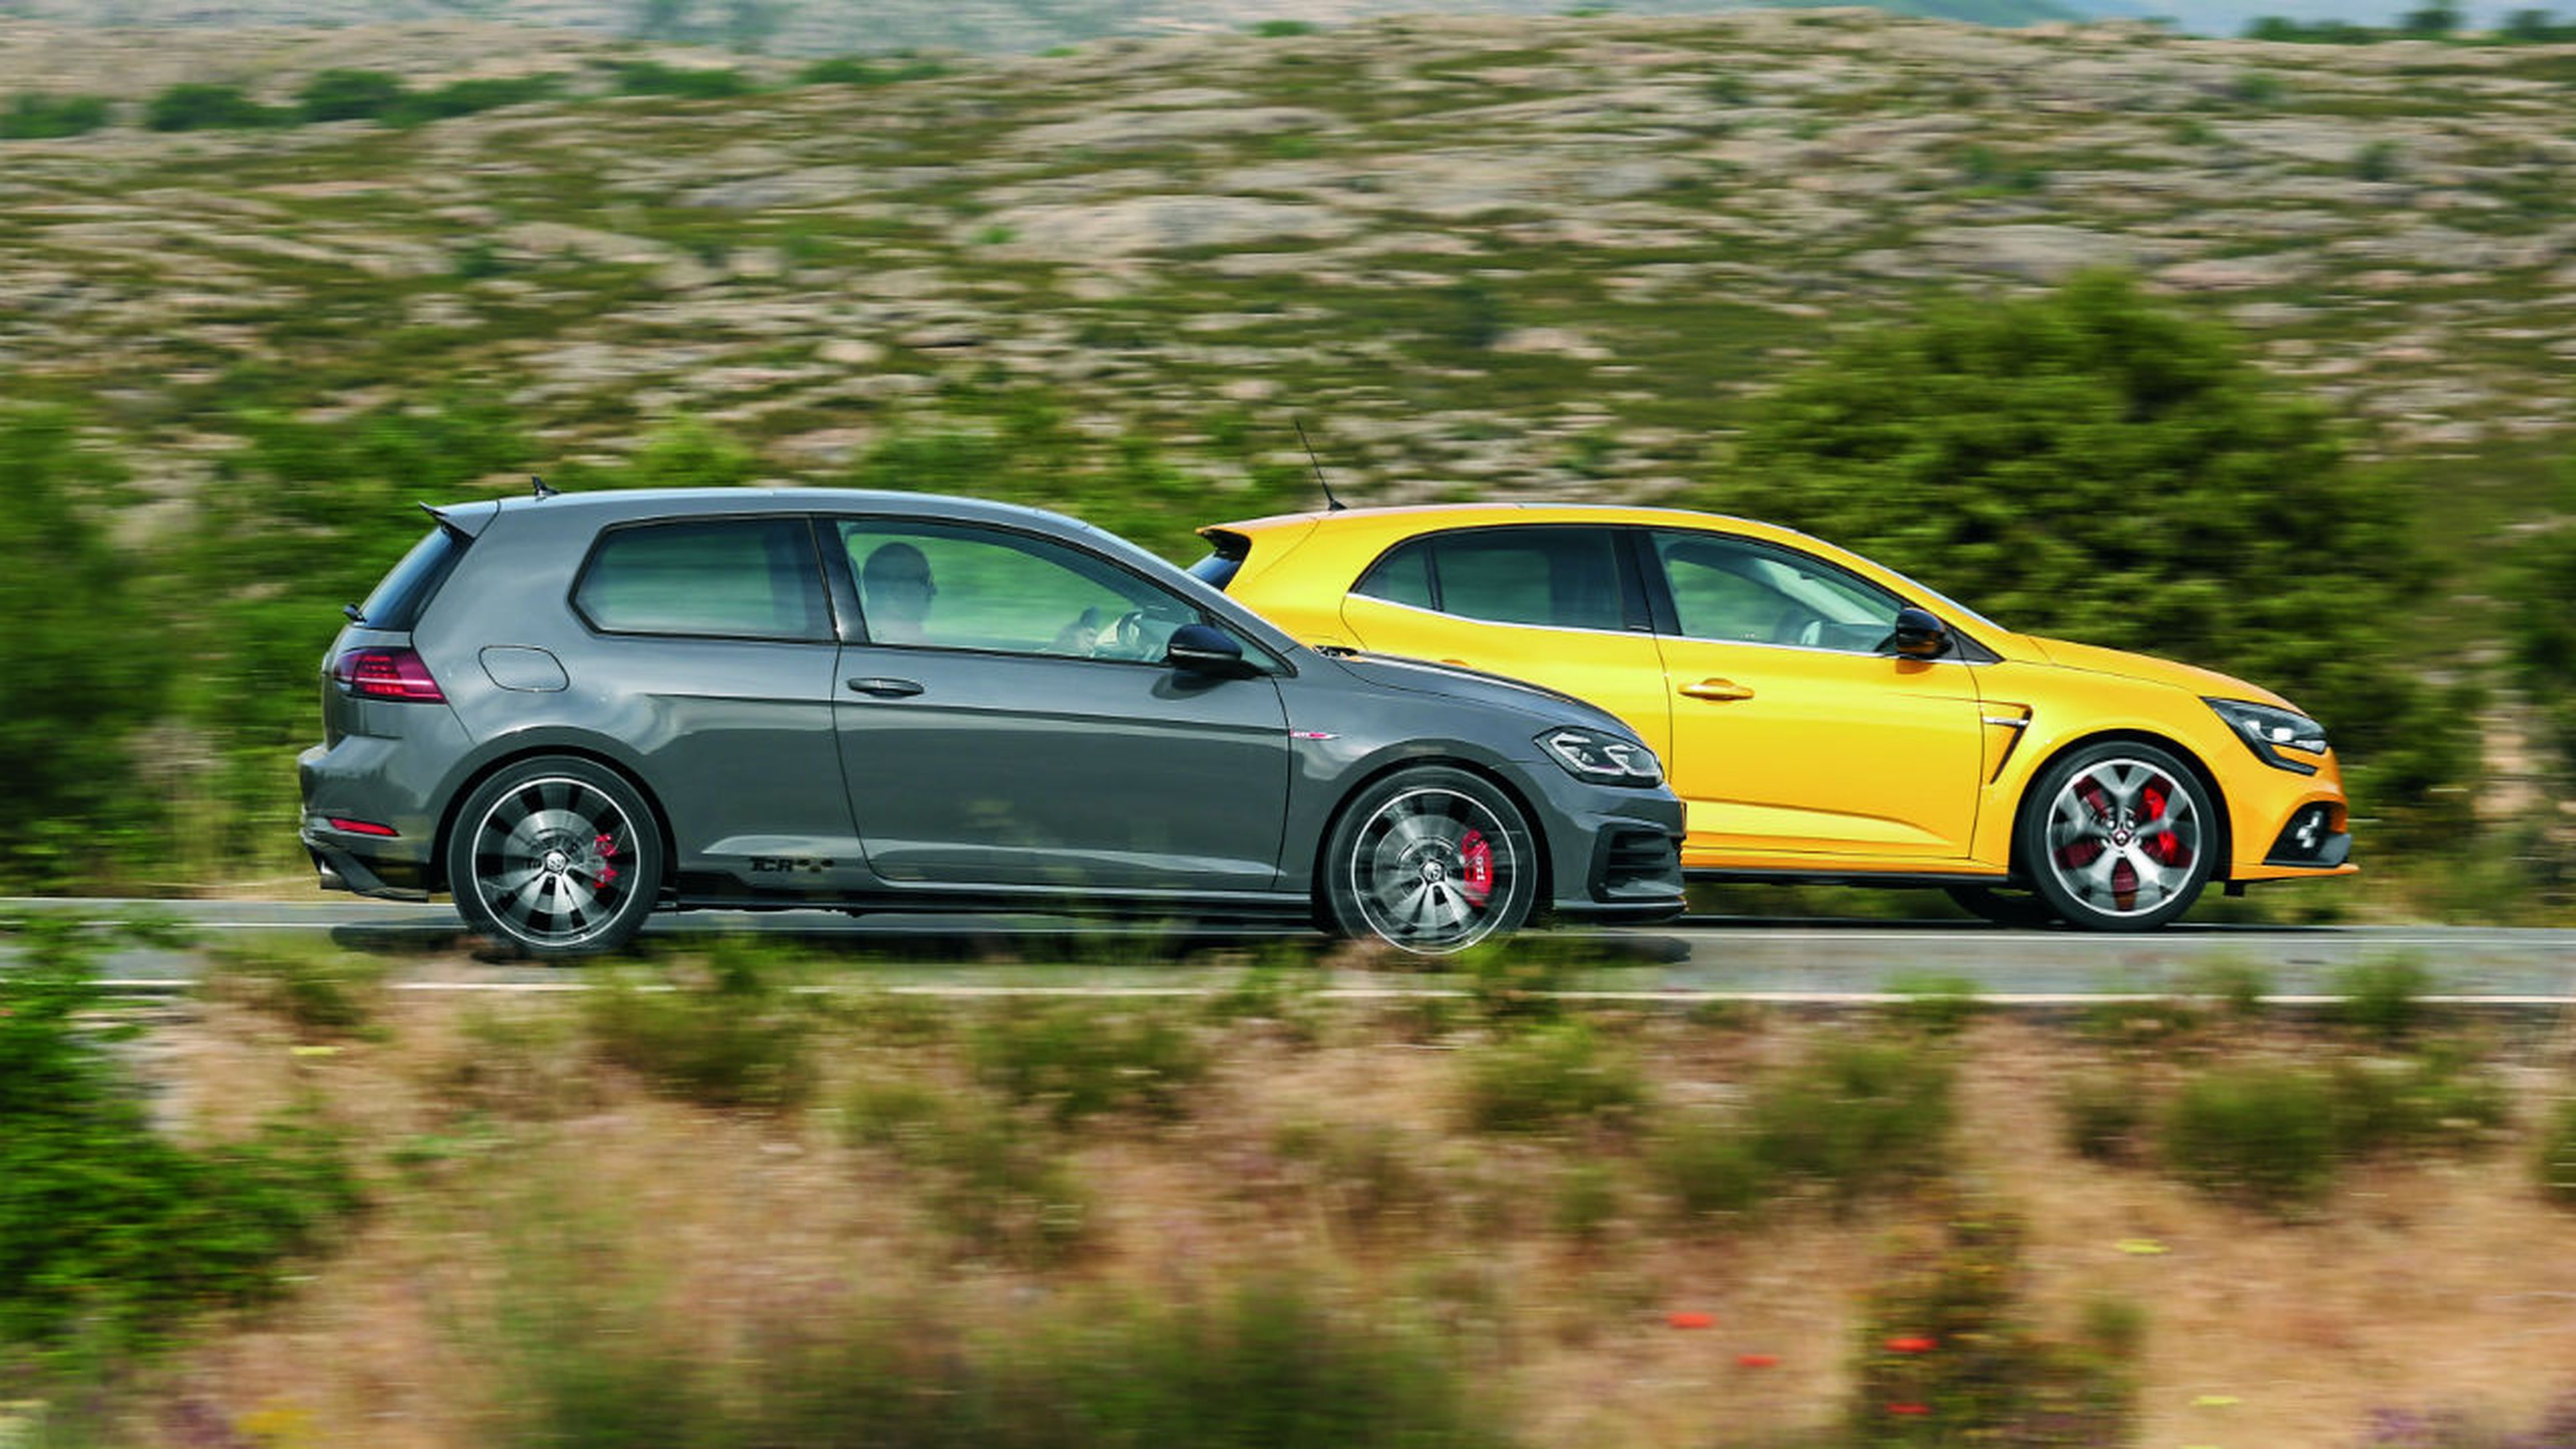 Comparativa Renault Mégane RS Trophy contra Volkswagen Golf GTI TCR